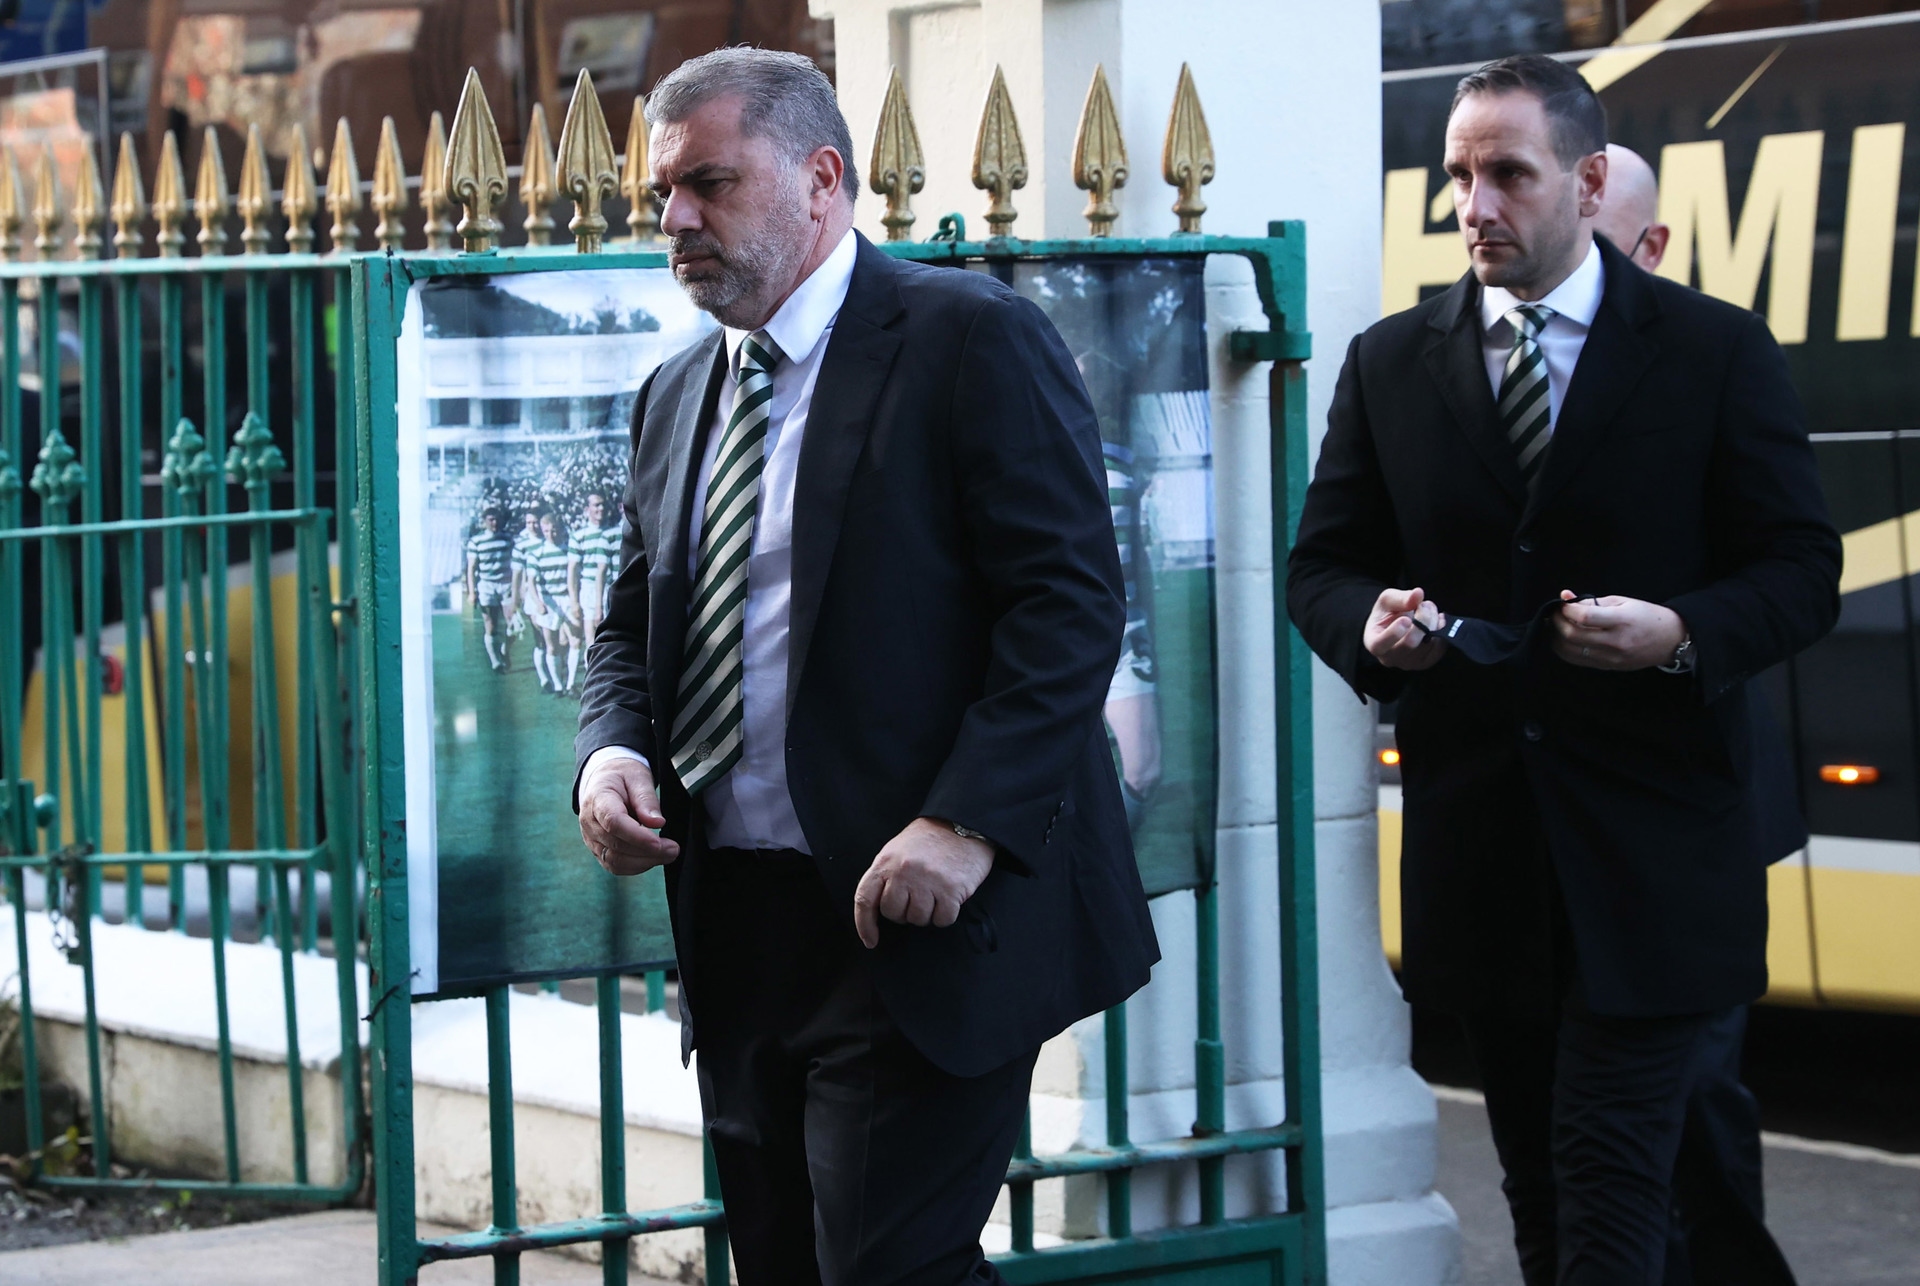 Current Celtic manager Ange Postecoglou arrives at St Mary's for Auld's funeral on Friday.